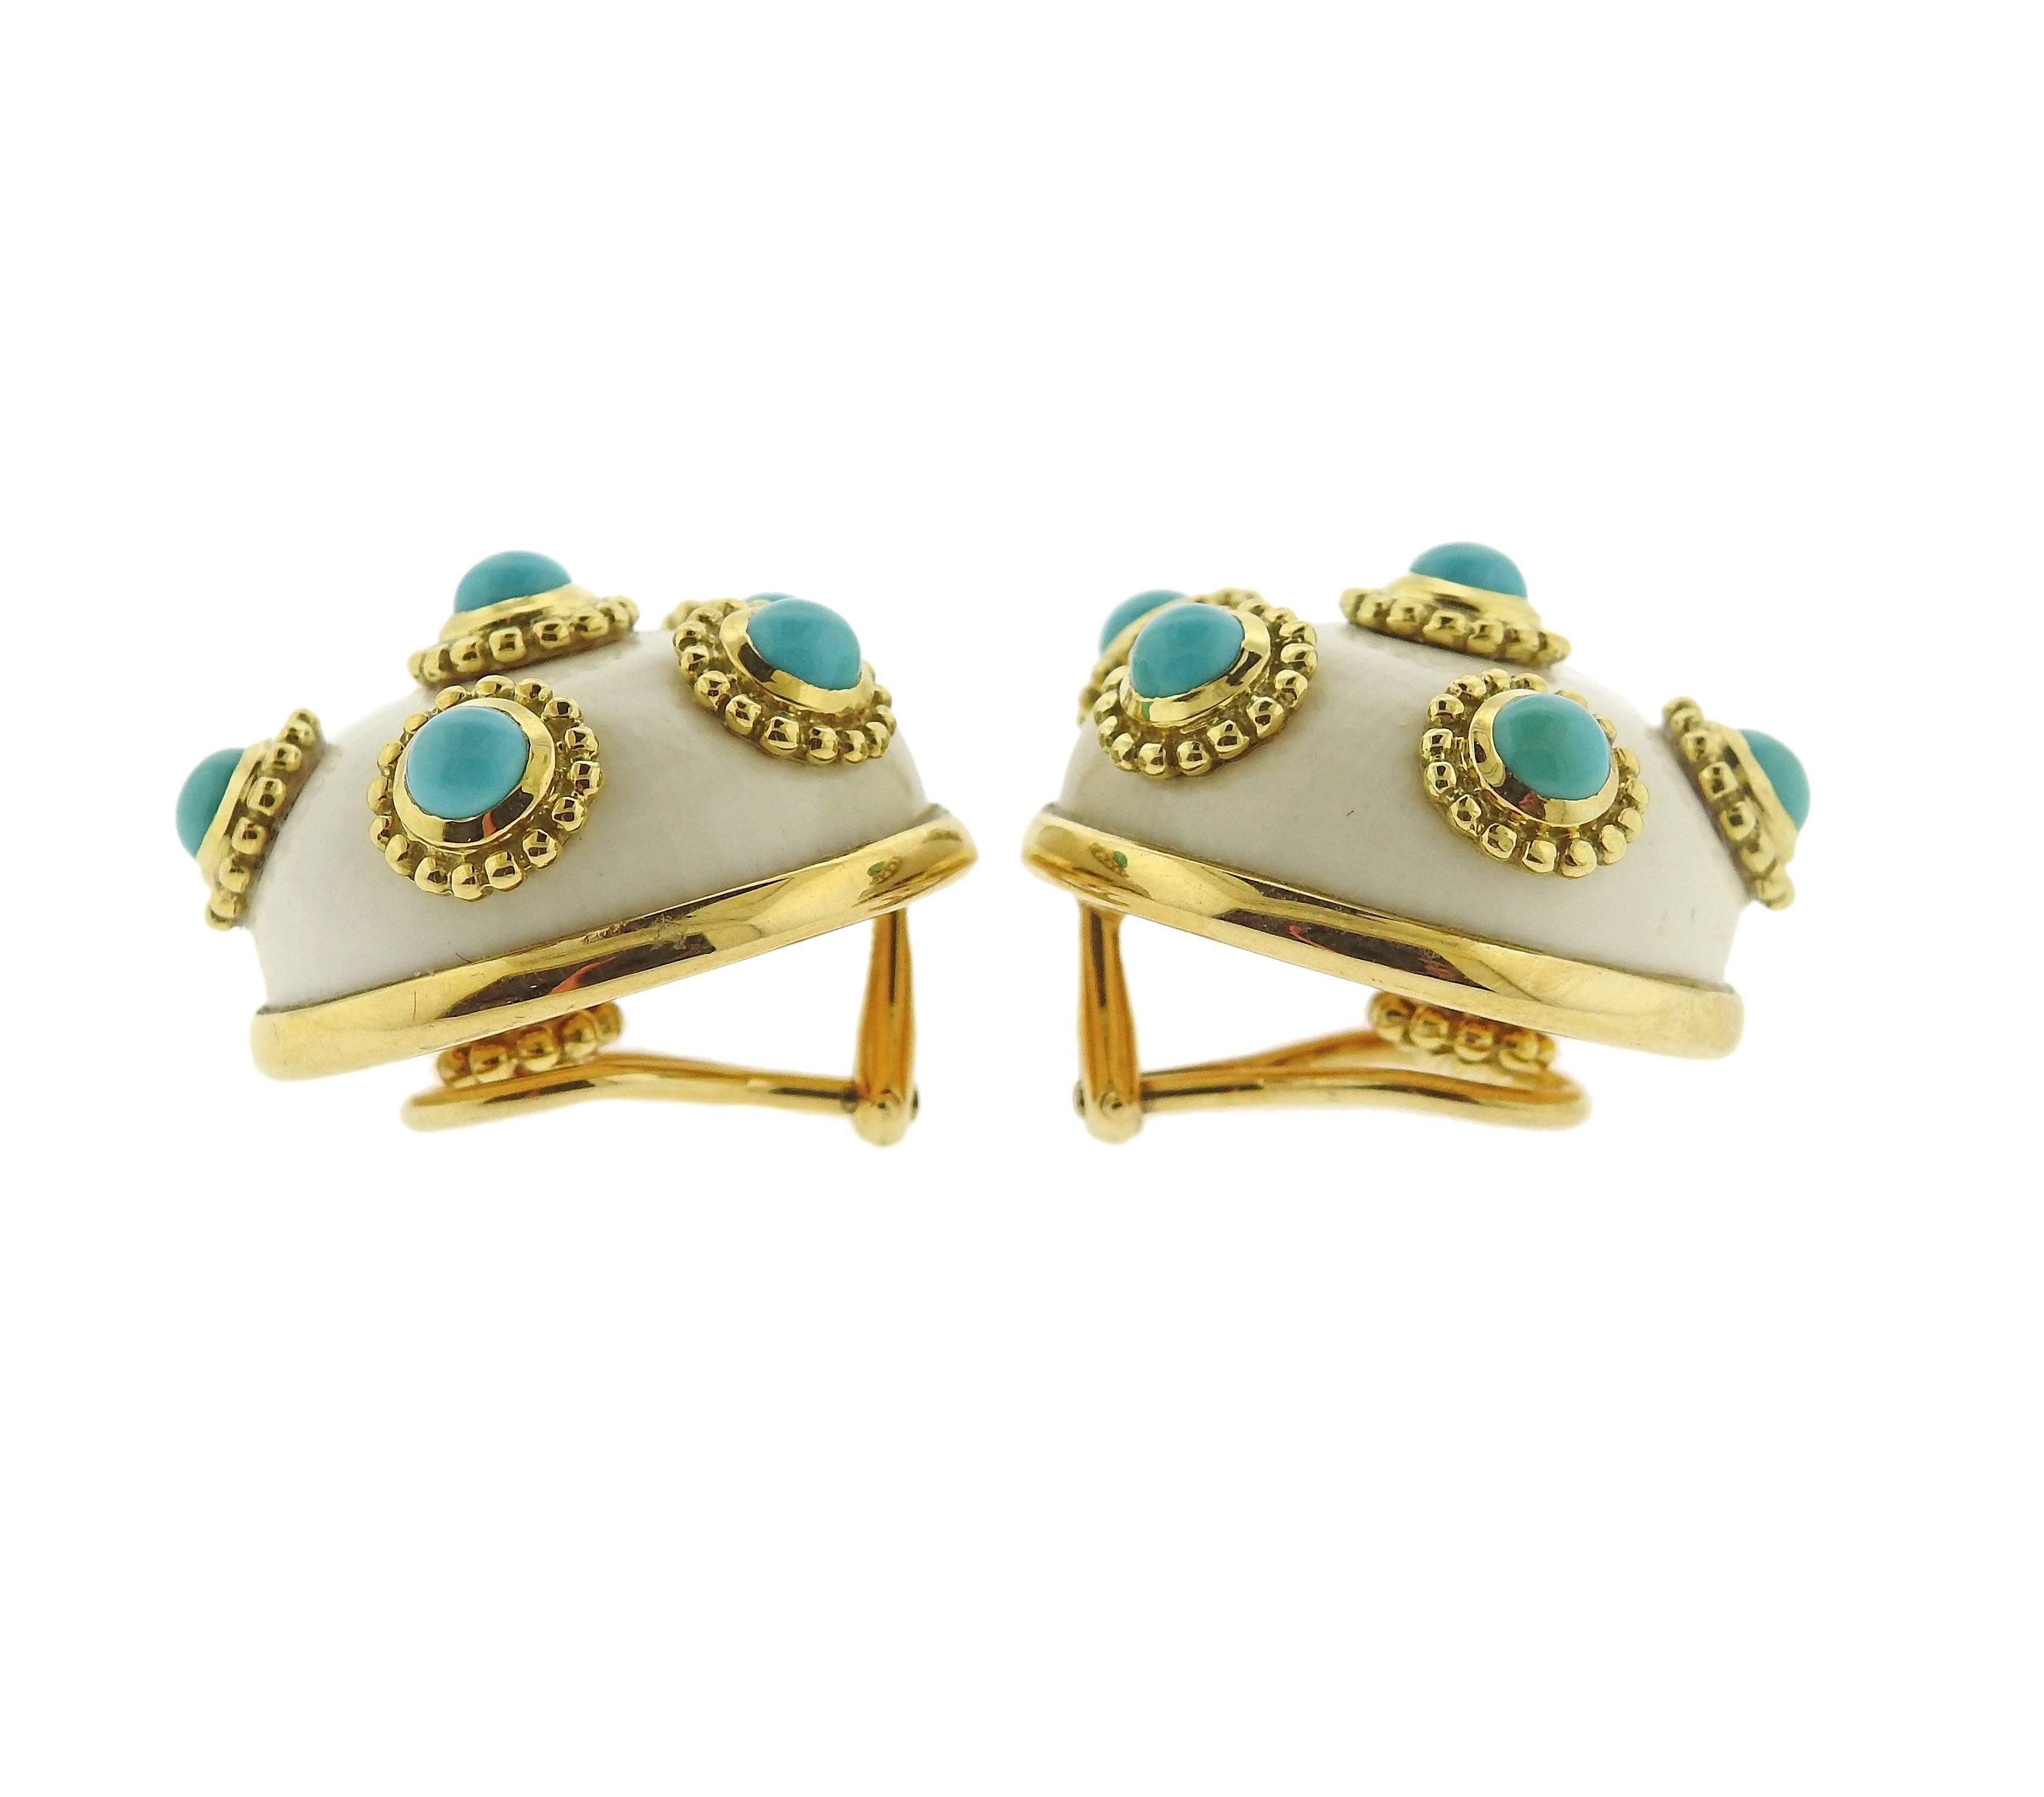 A pair of 18k gold button earrings crafted by Adria de Haume  featuring turquoise cabochons over a mammoth ivory. Earrings measure 24mm in diameter. Marked haume 750 35169. Weight is 31.2 grams. 